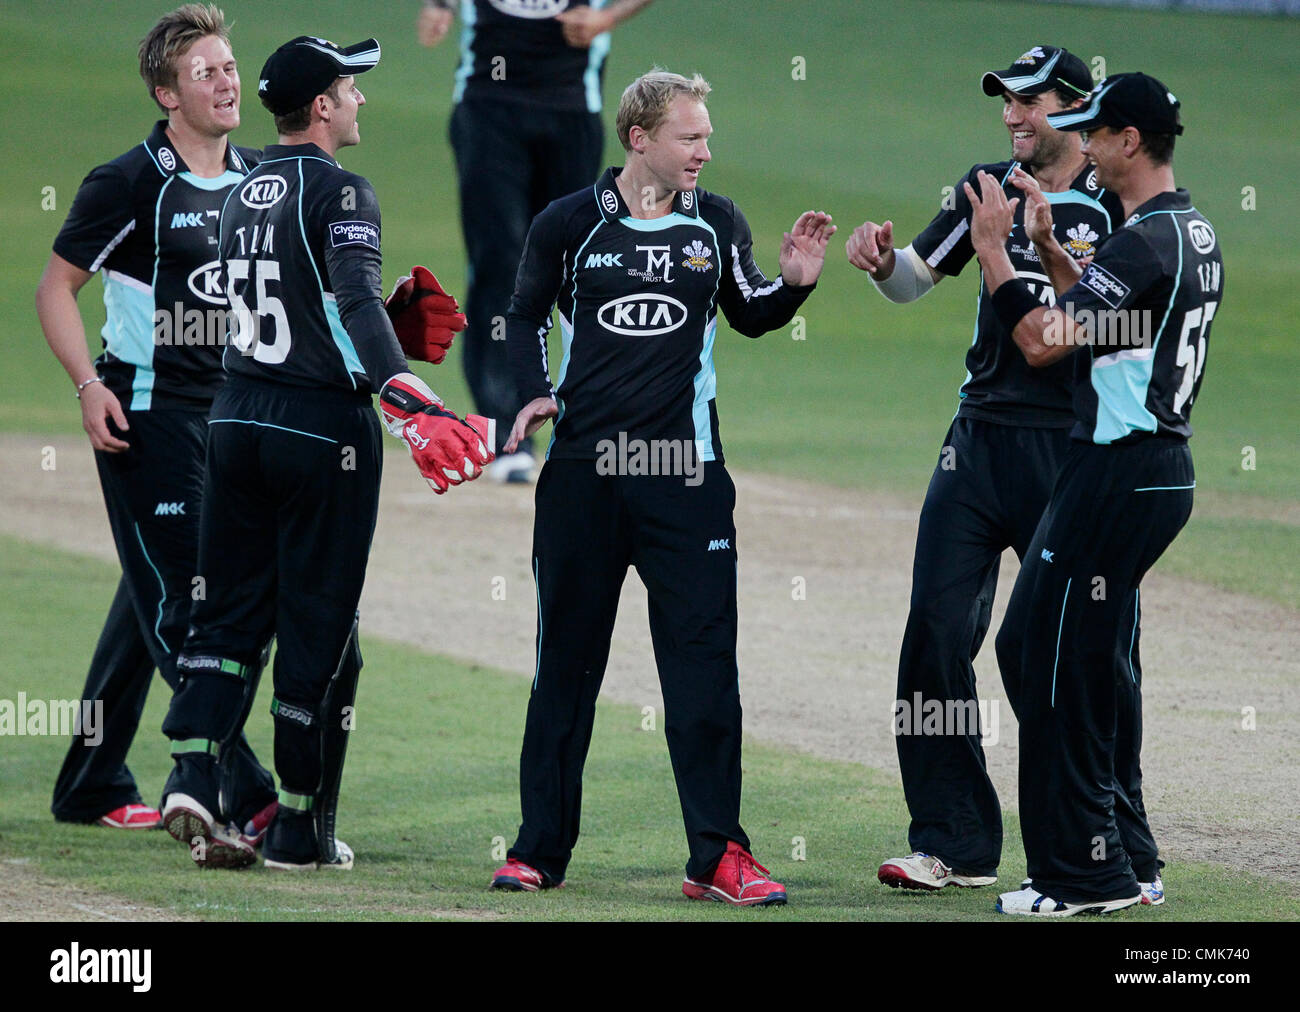 21.08.2012. The Oval, London, England. Gareth Batty gets the accolades after bowling Marcus north during the CB40 match Surrey V Welsh Dragons at The Kia Oval Kennington London England. Stock Photo